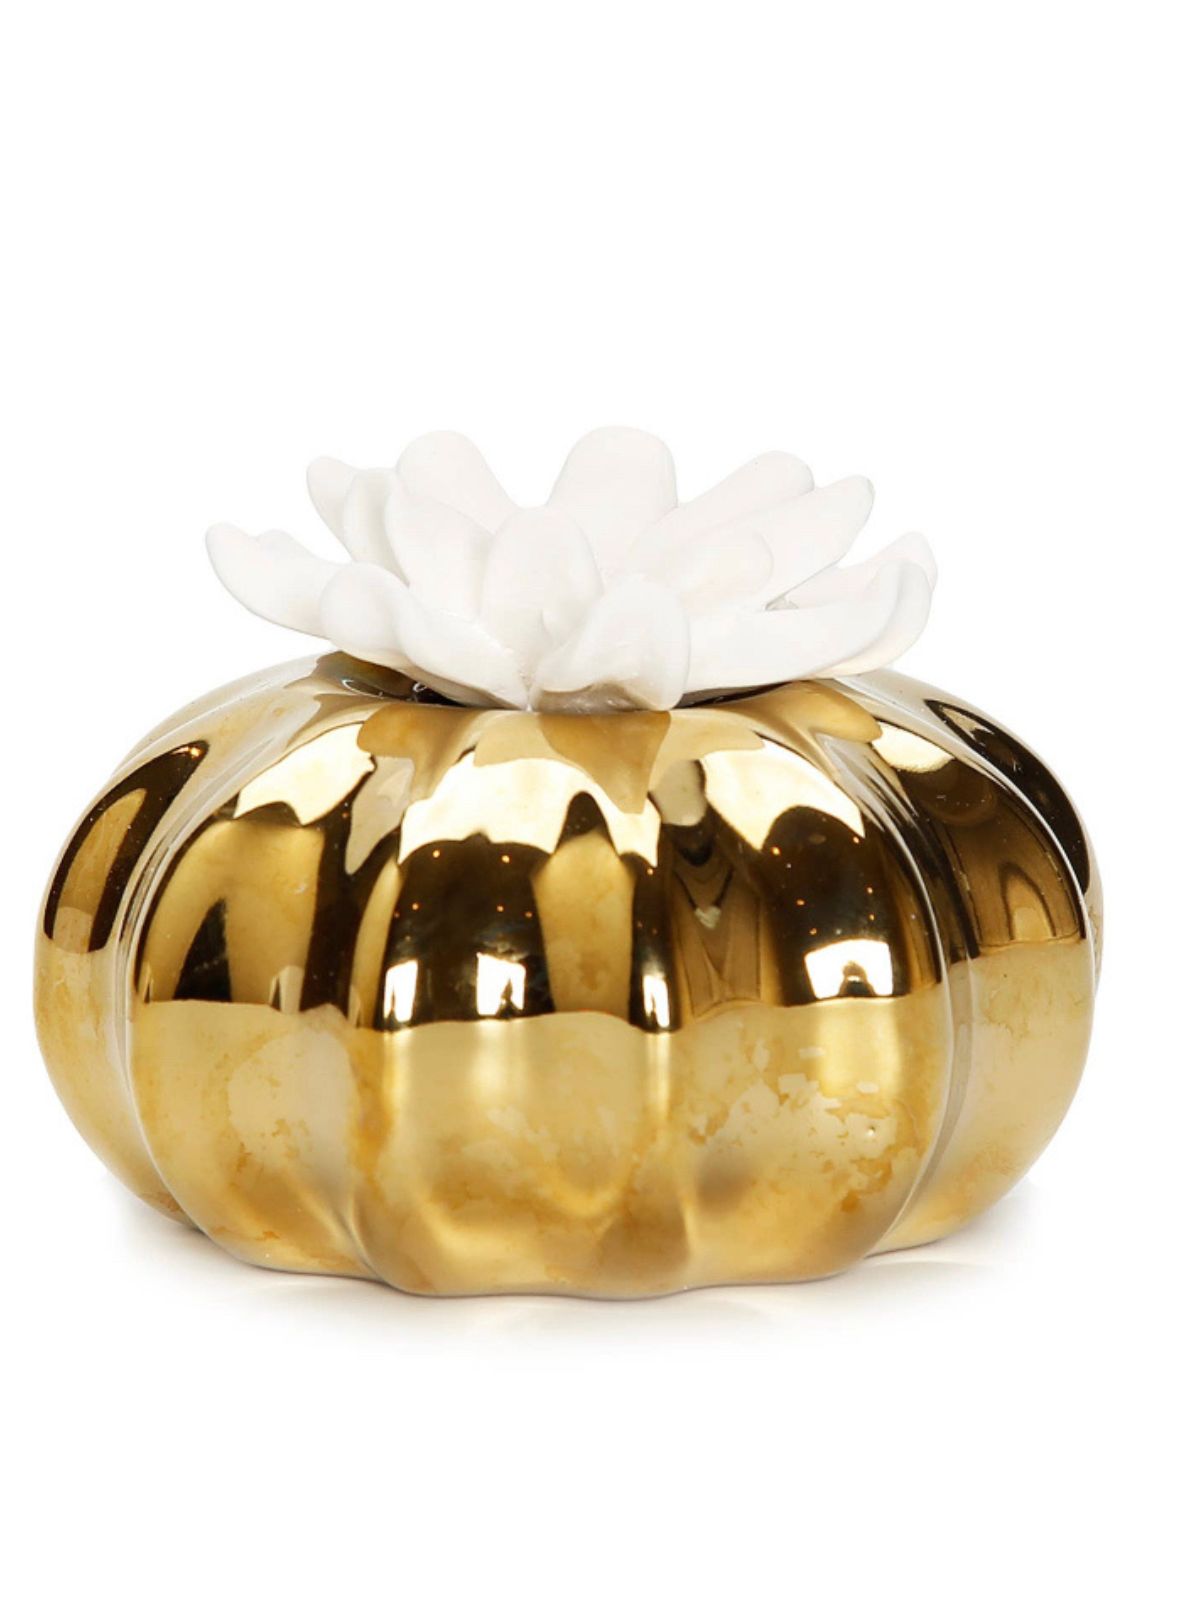 English Pears and Freesia Luxury Scent embossed in this stunning Gold Ruffled and White Flower Reed Diffuser.